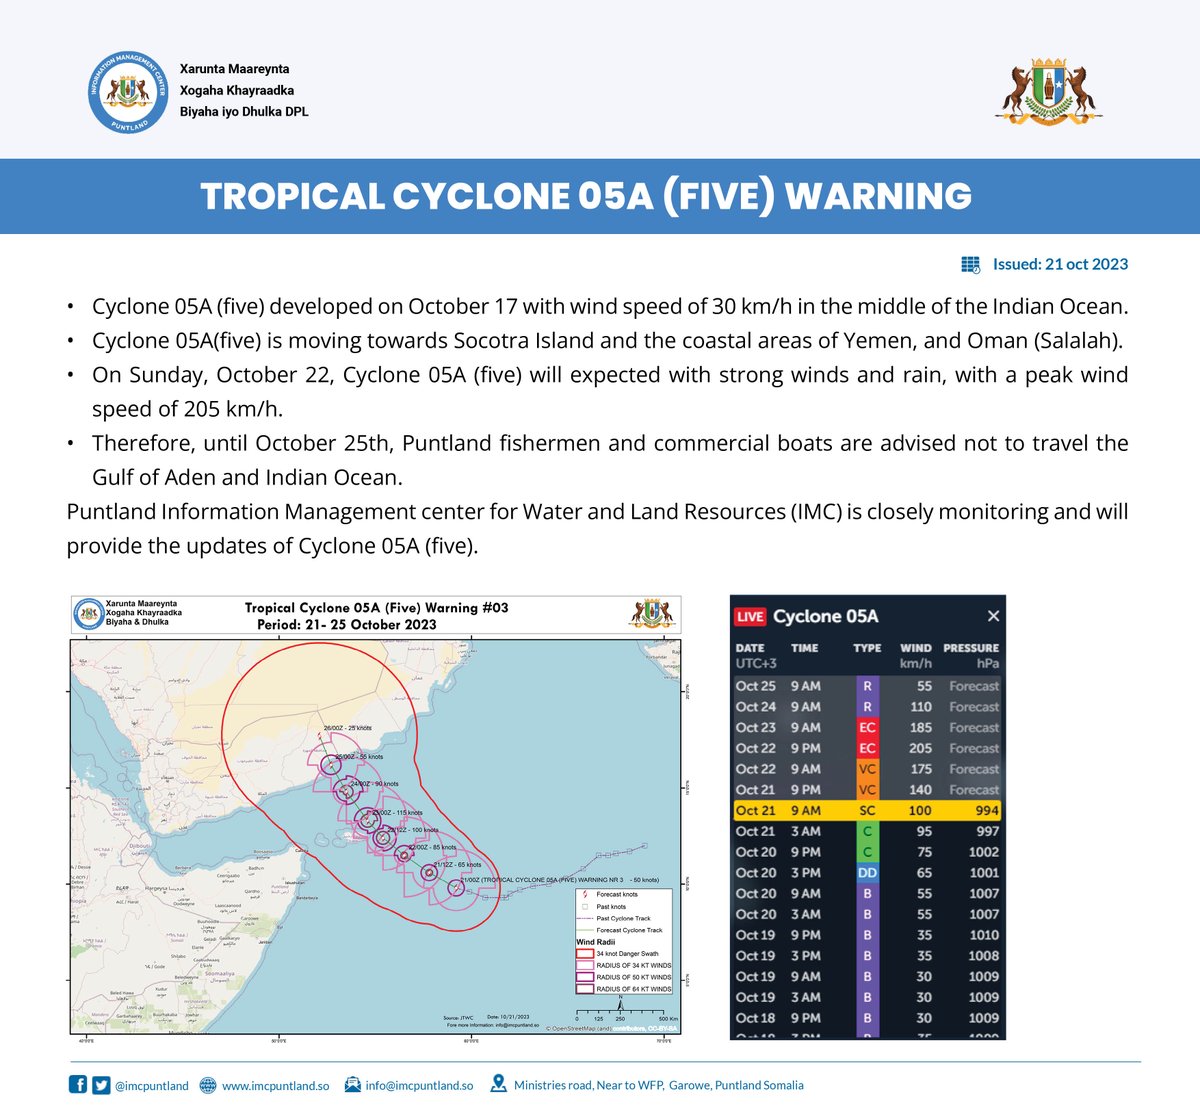 🌀 Alert: Cyclone 05A (five) has intensified in the Indian Ocean, reaching 30 km/h winds. It's heading towards Socotra Island, Yemen, and Oman's coastal areas (Salalah). 🌧️ 📅 On Sunday, Oct 22, expect strong winds and rain, peaking at 205 km/h. 🌪️ For more details read below👇